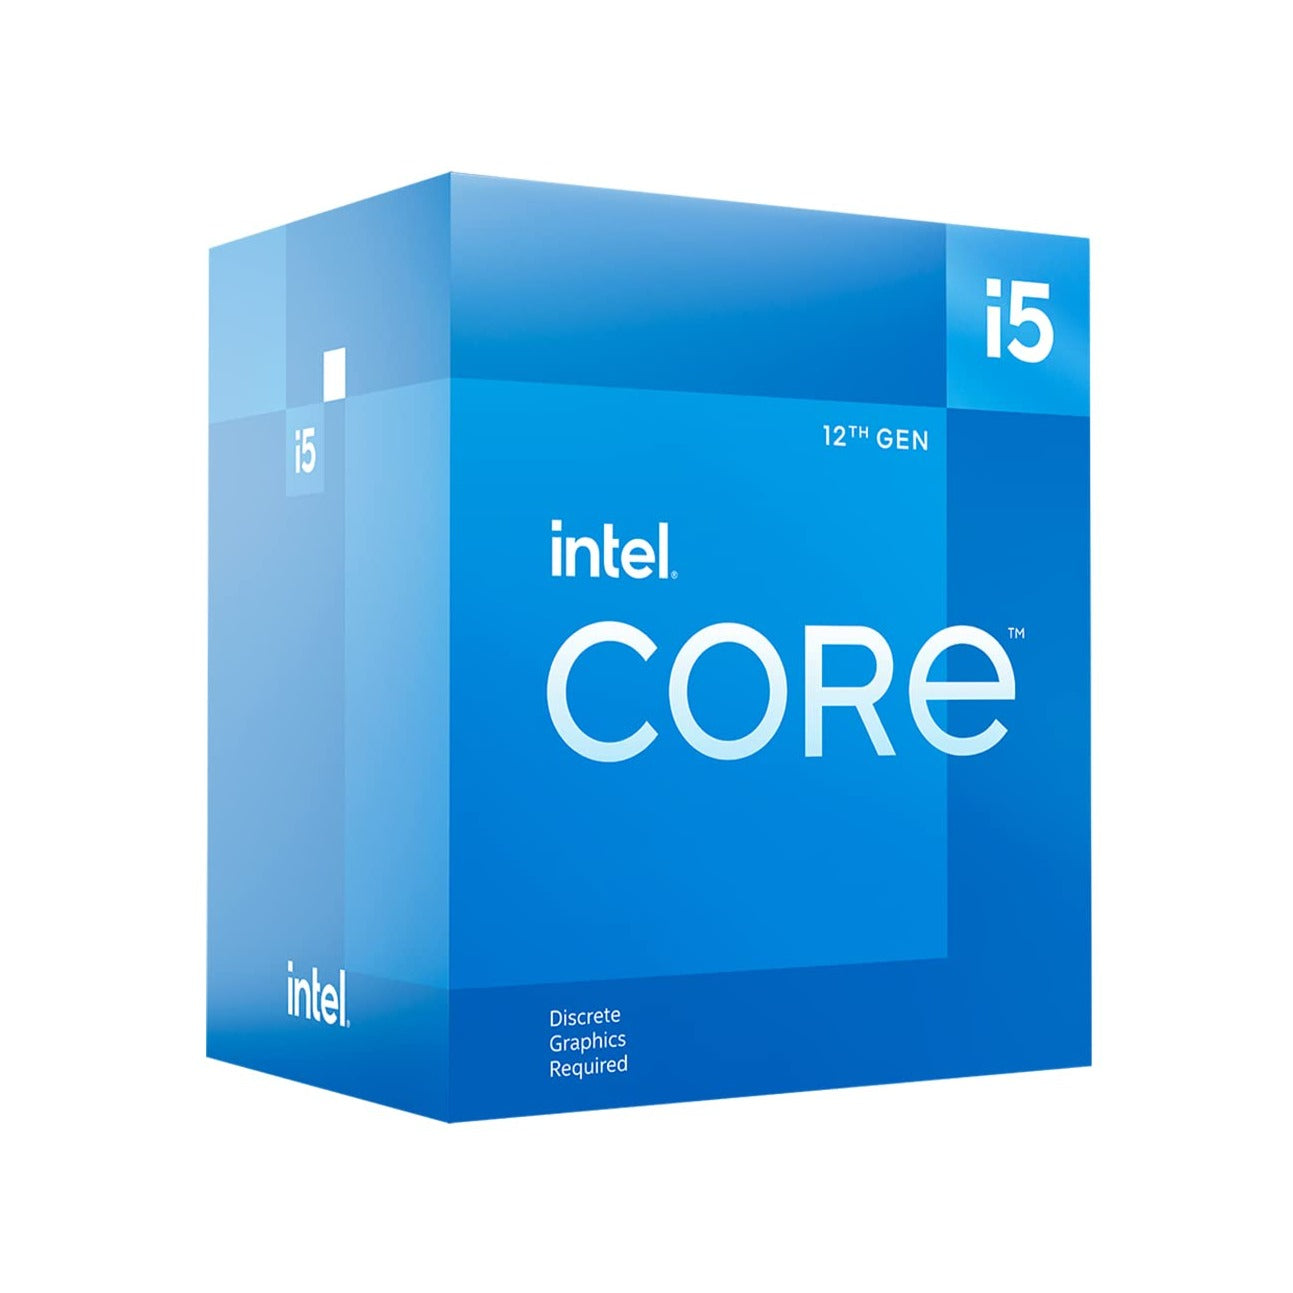 Intel Core i5-12400 Desktop Processor with 6 Cores and 12 Threads, Intel 7 Lithography, and Intel UHD Graphics 730